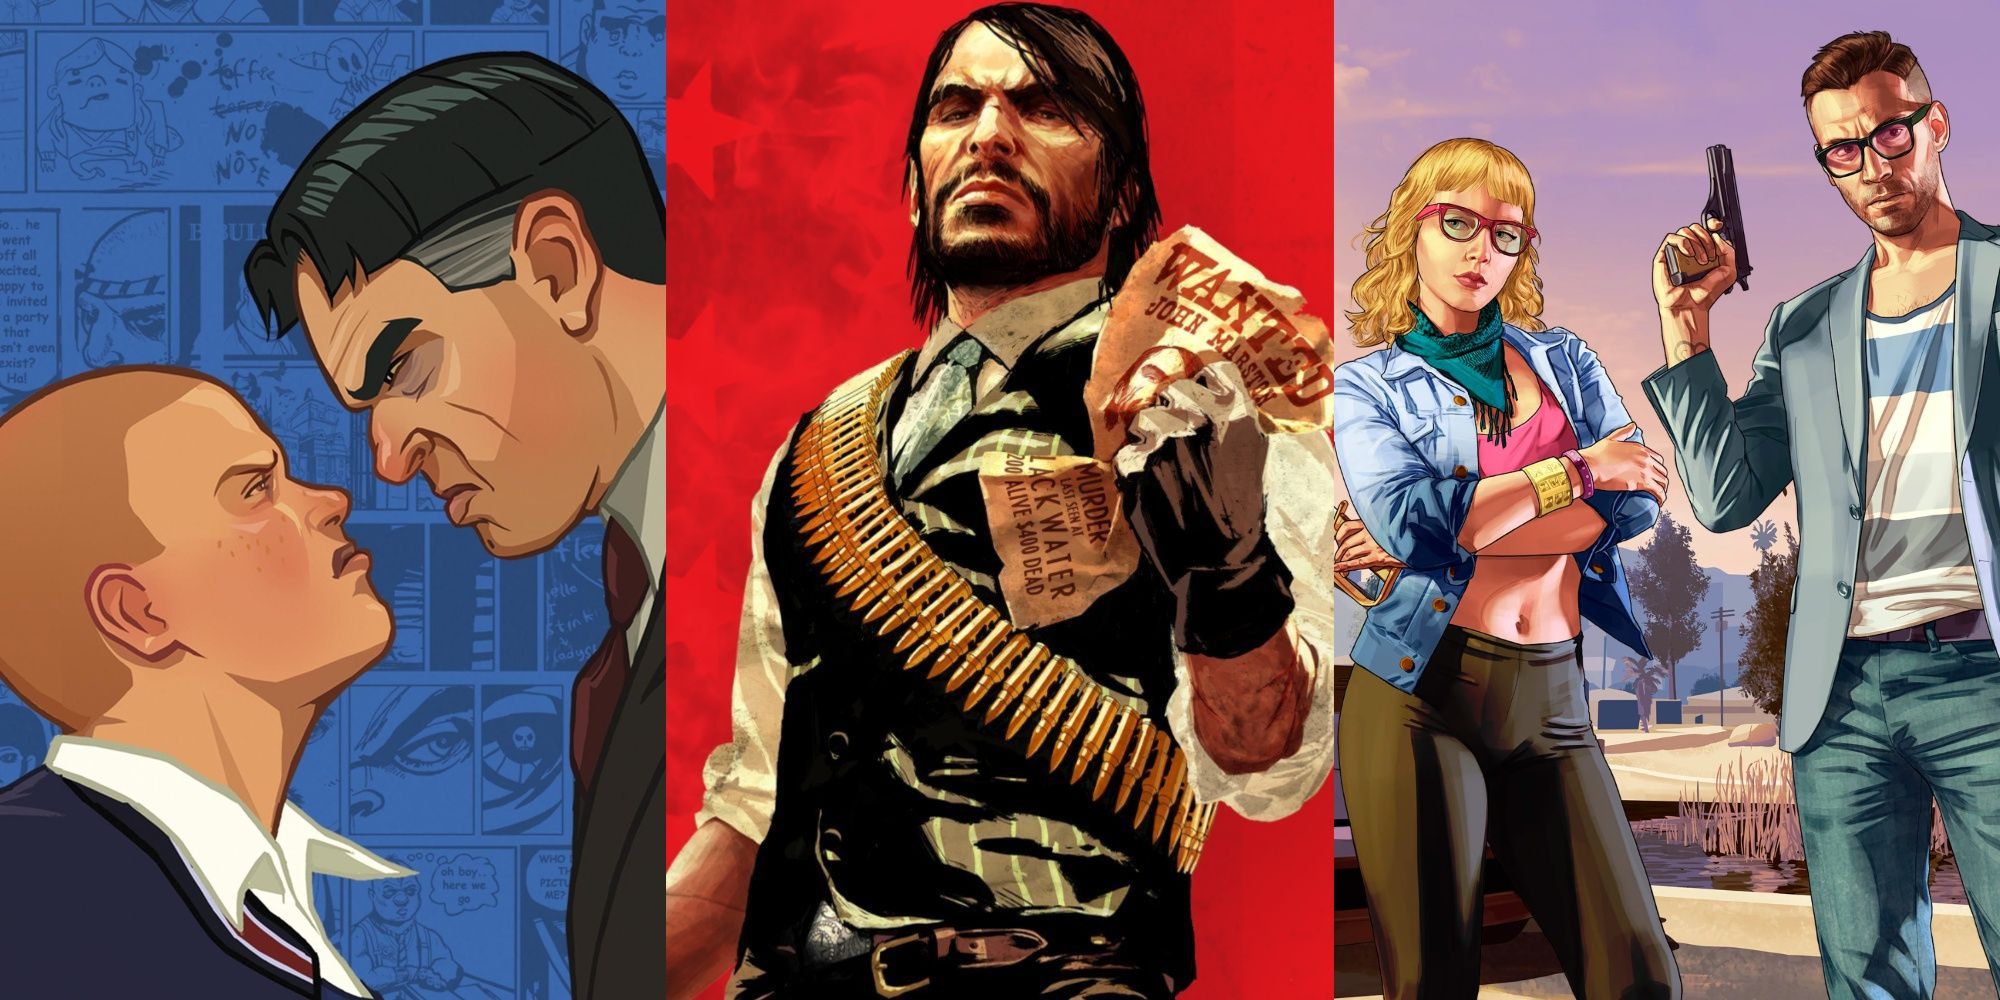 A collage showing the box art for Bully, and key art for Red Dead Redemption and GTA Online